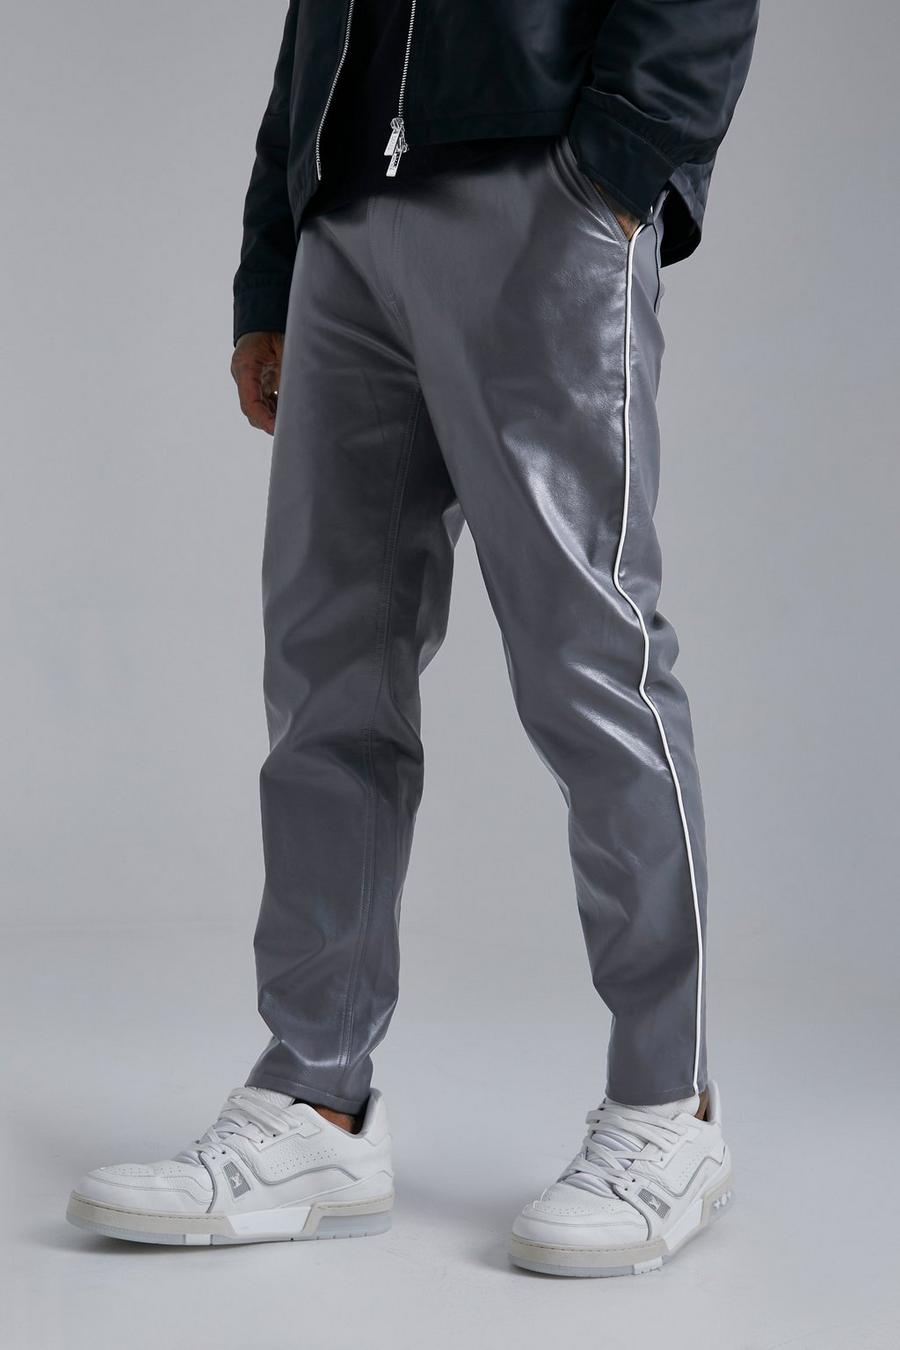 Mens Tapered Fit Pu Trouser With Piping 28R Boohoo Women Clothing Pants Cargo Pants 